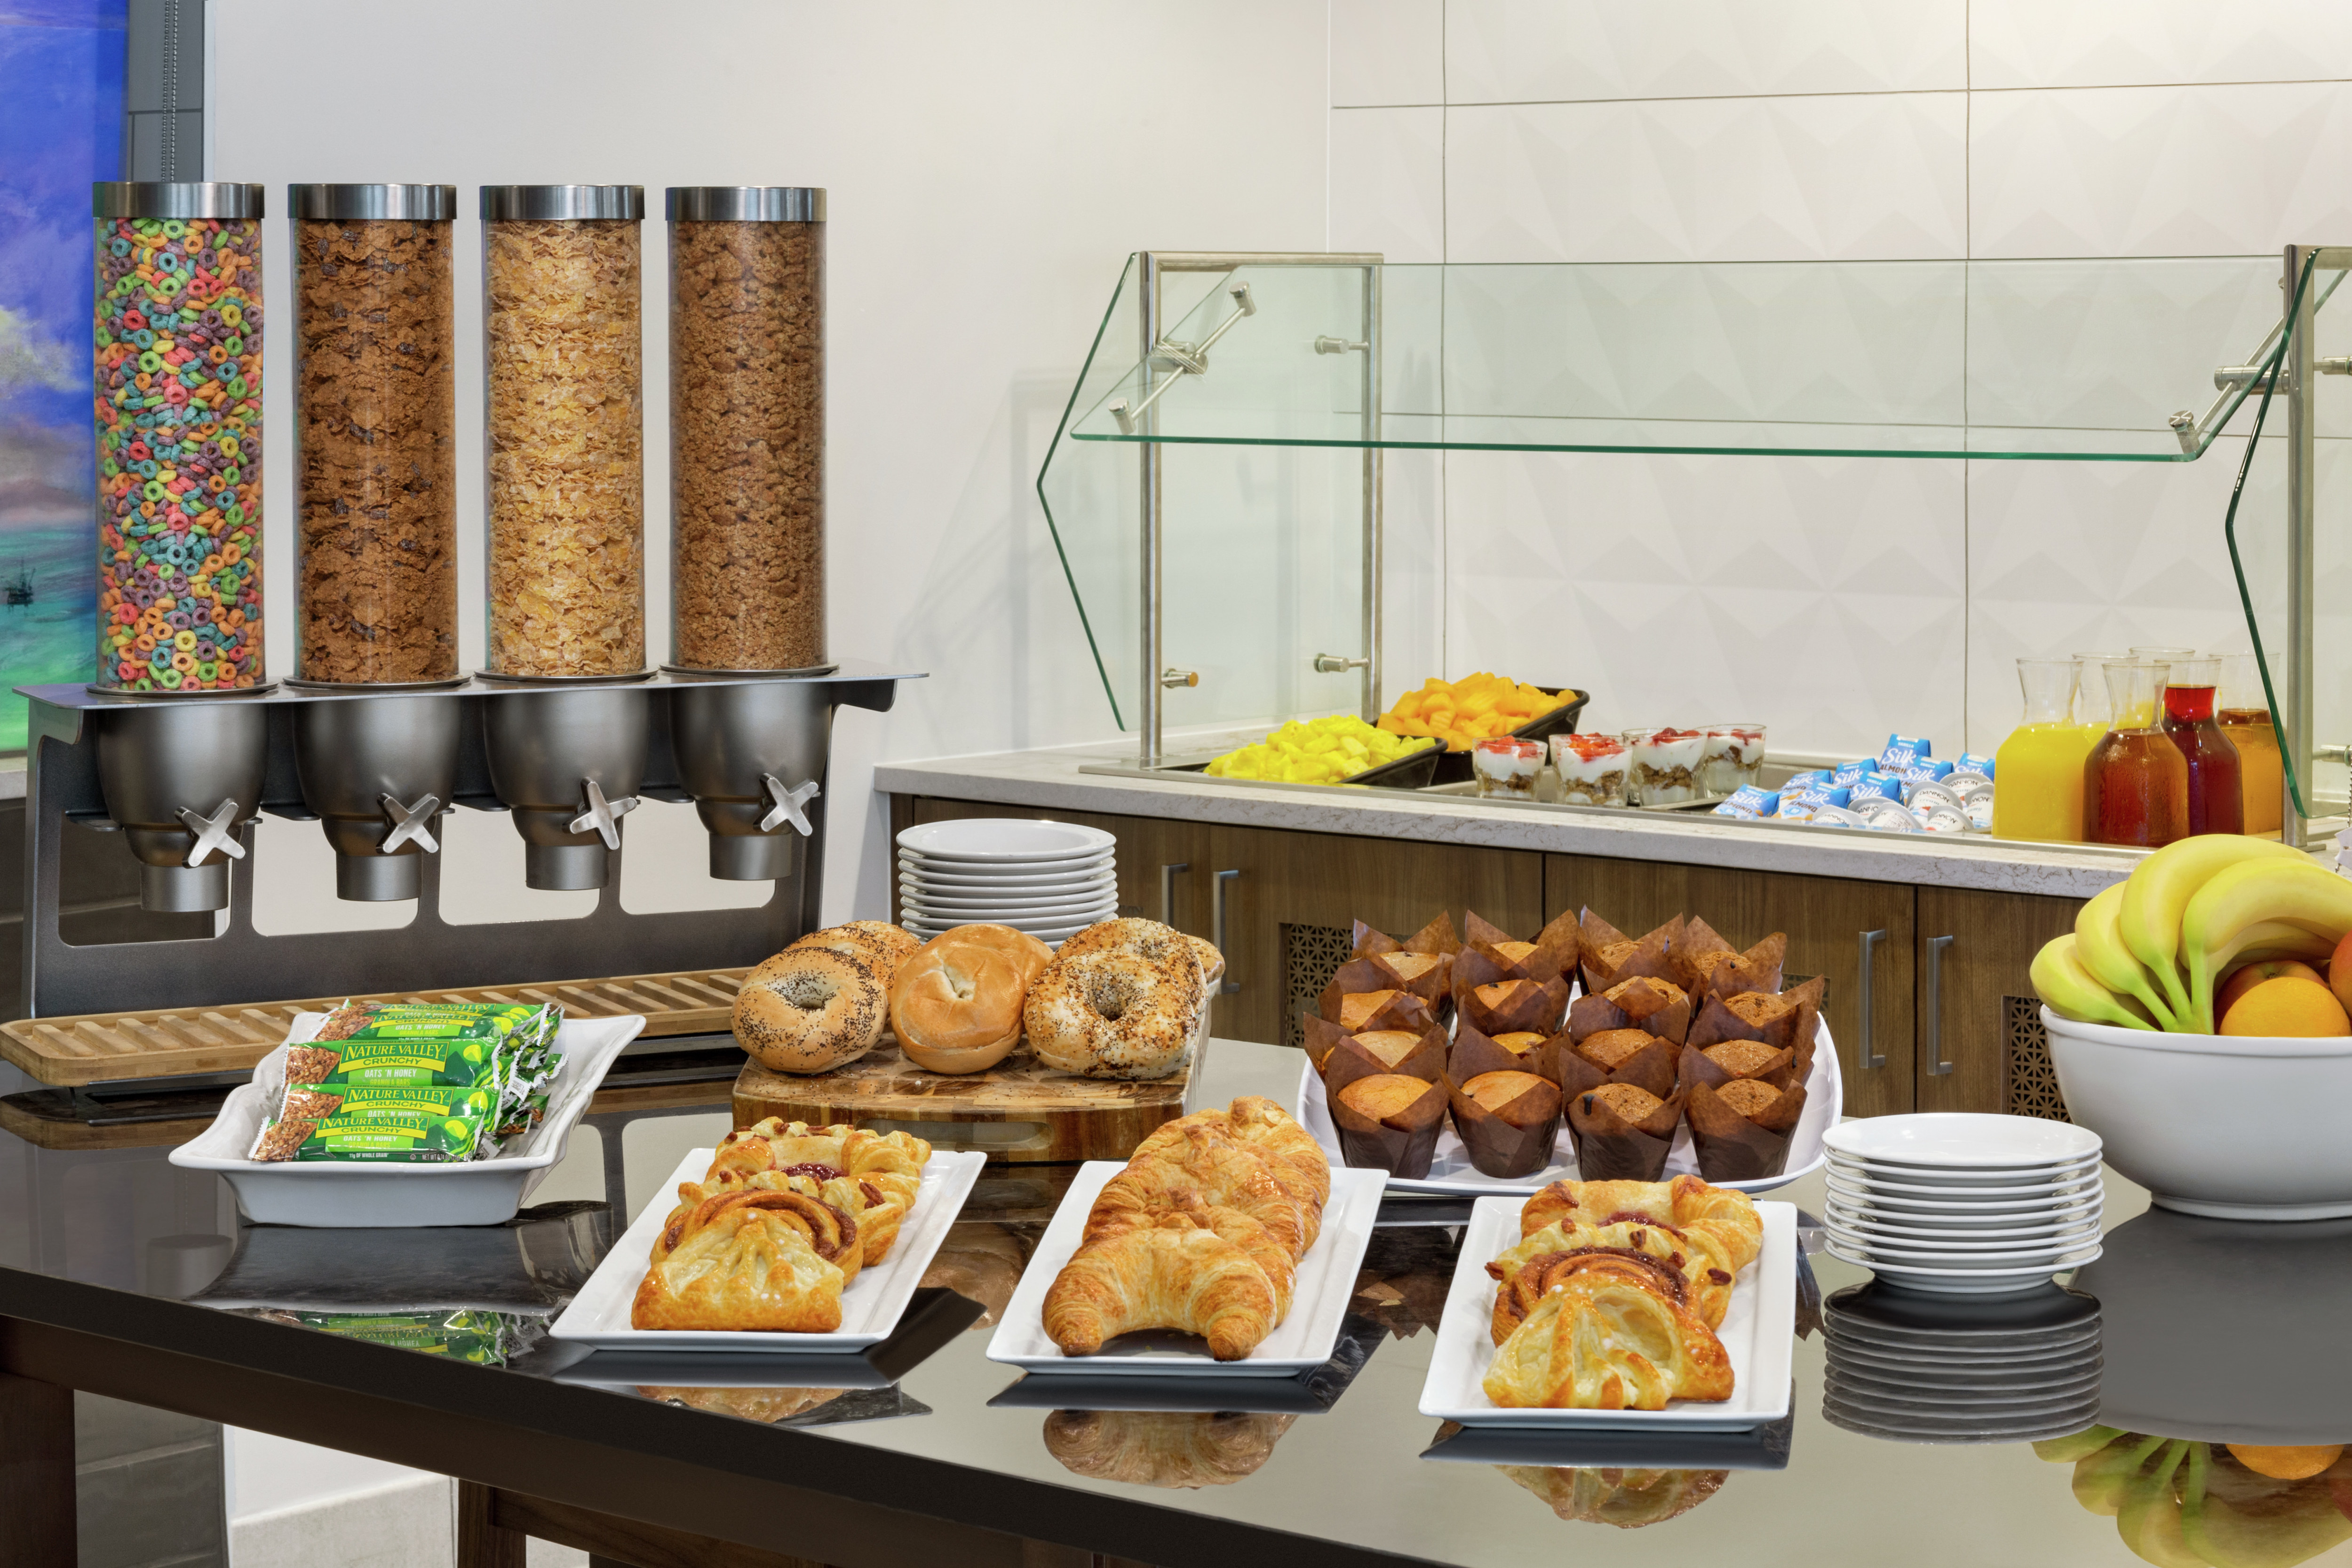 Daily complimentary breakfast buffet overflowing with delicious food and beverages for guests to enjoy.